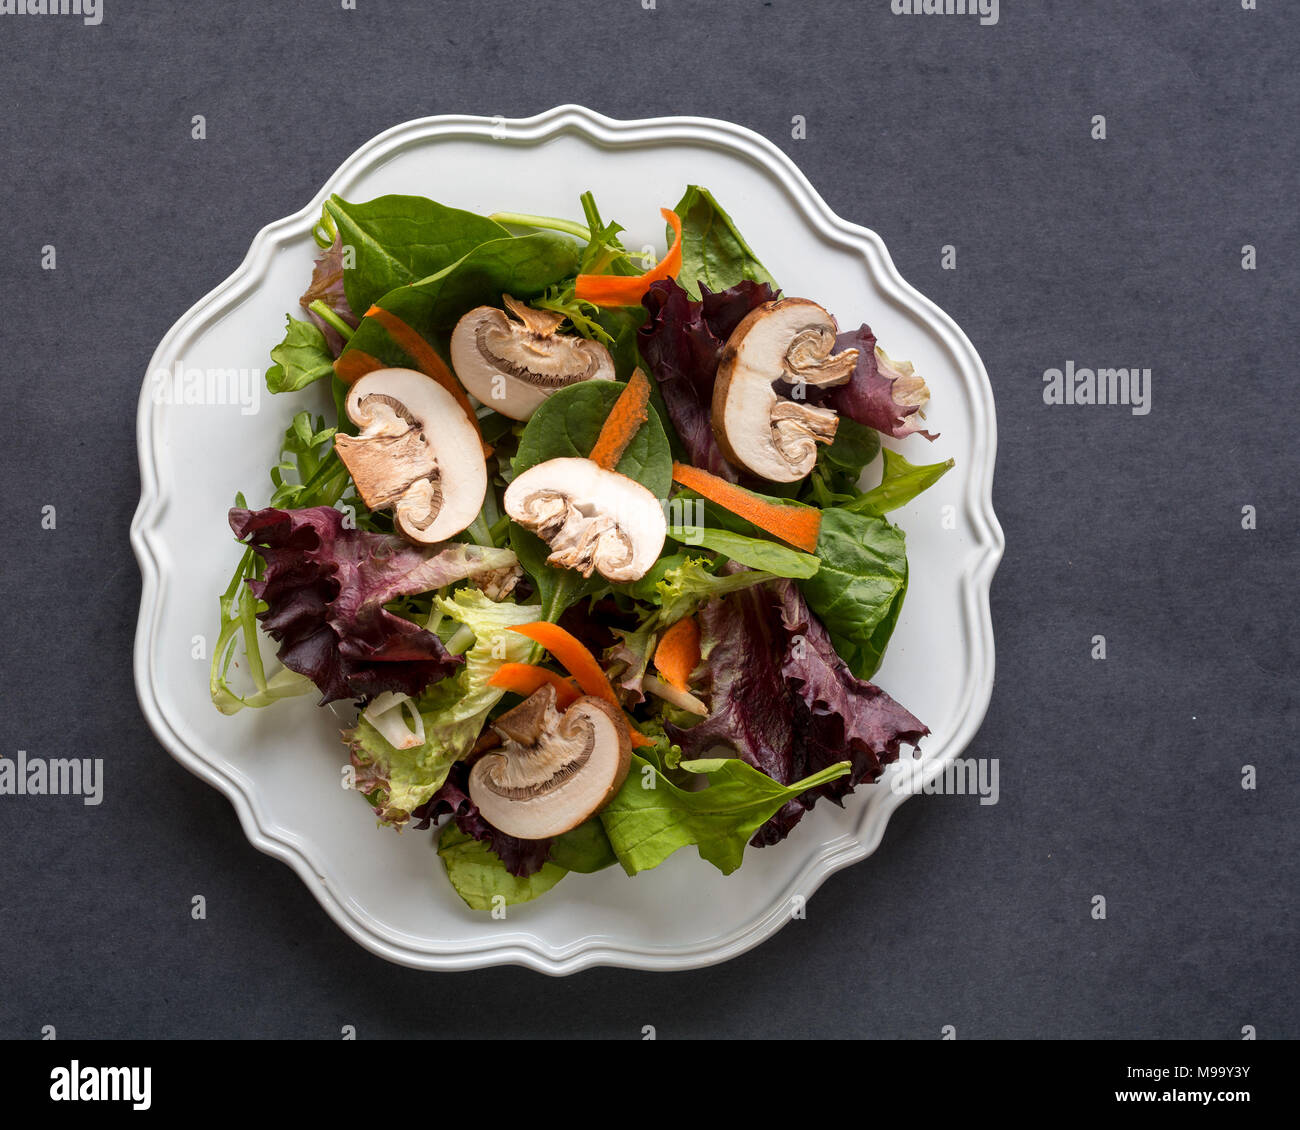 Unseasoned organic mixed greens, carrots and mushrooms salad  in white plate bowl, on dark background, top view-diet food concept Stock Photo